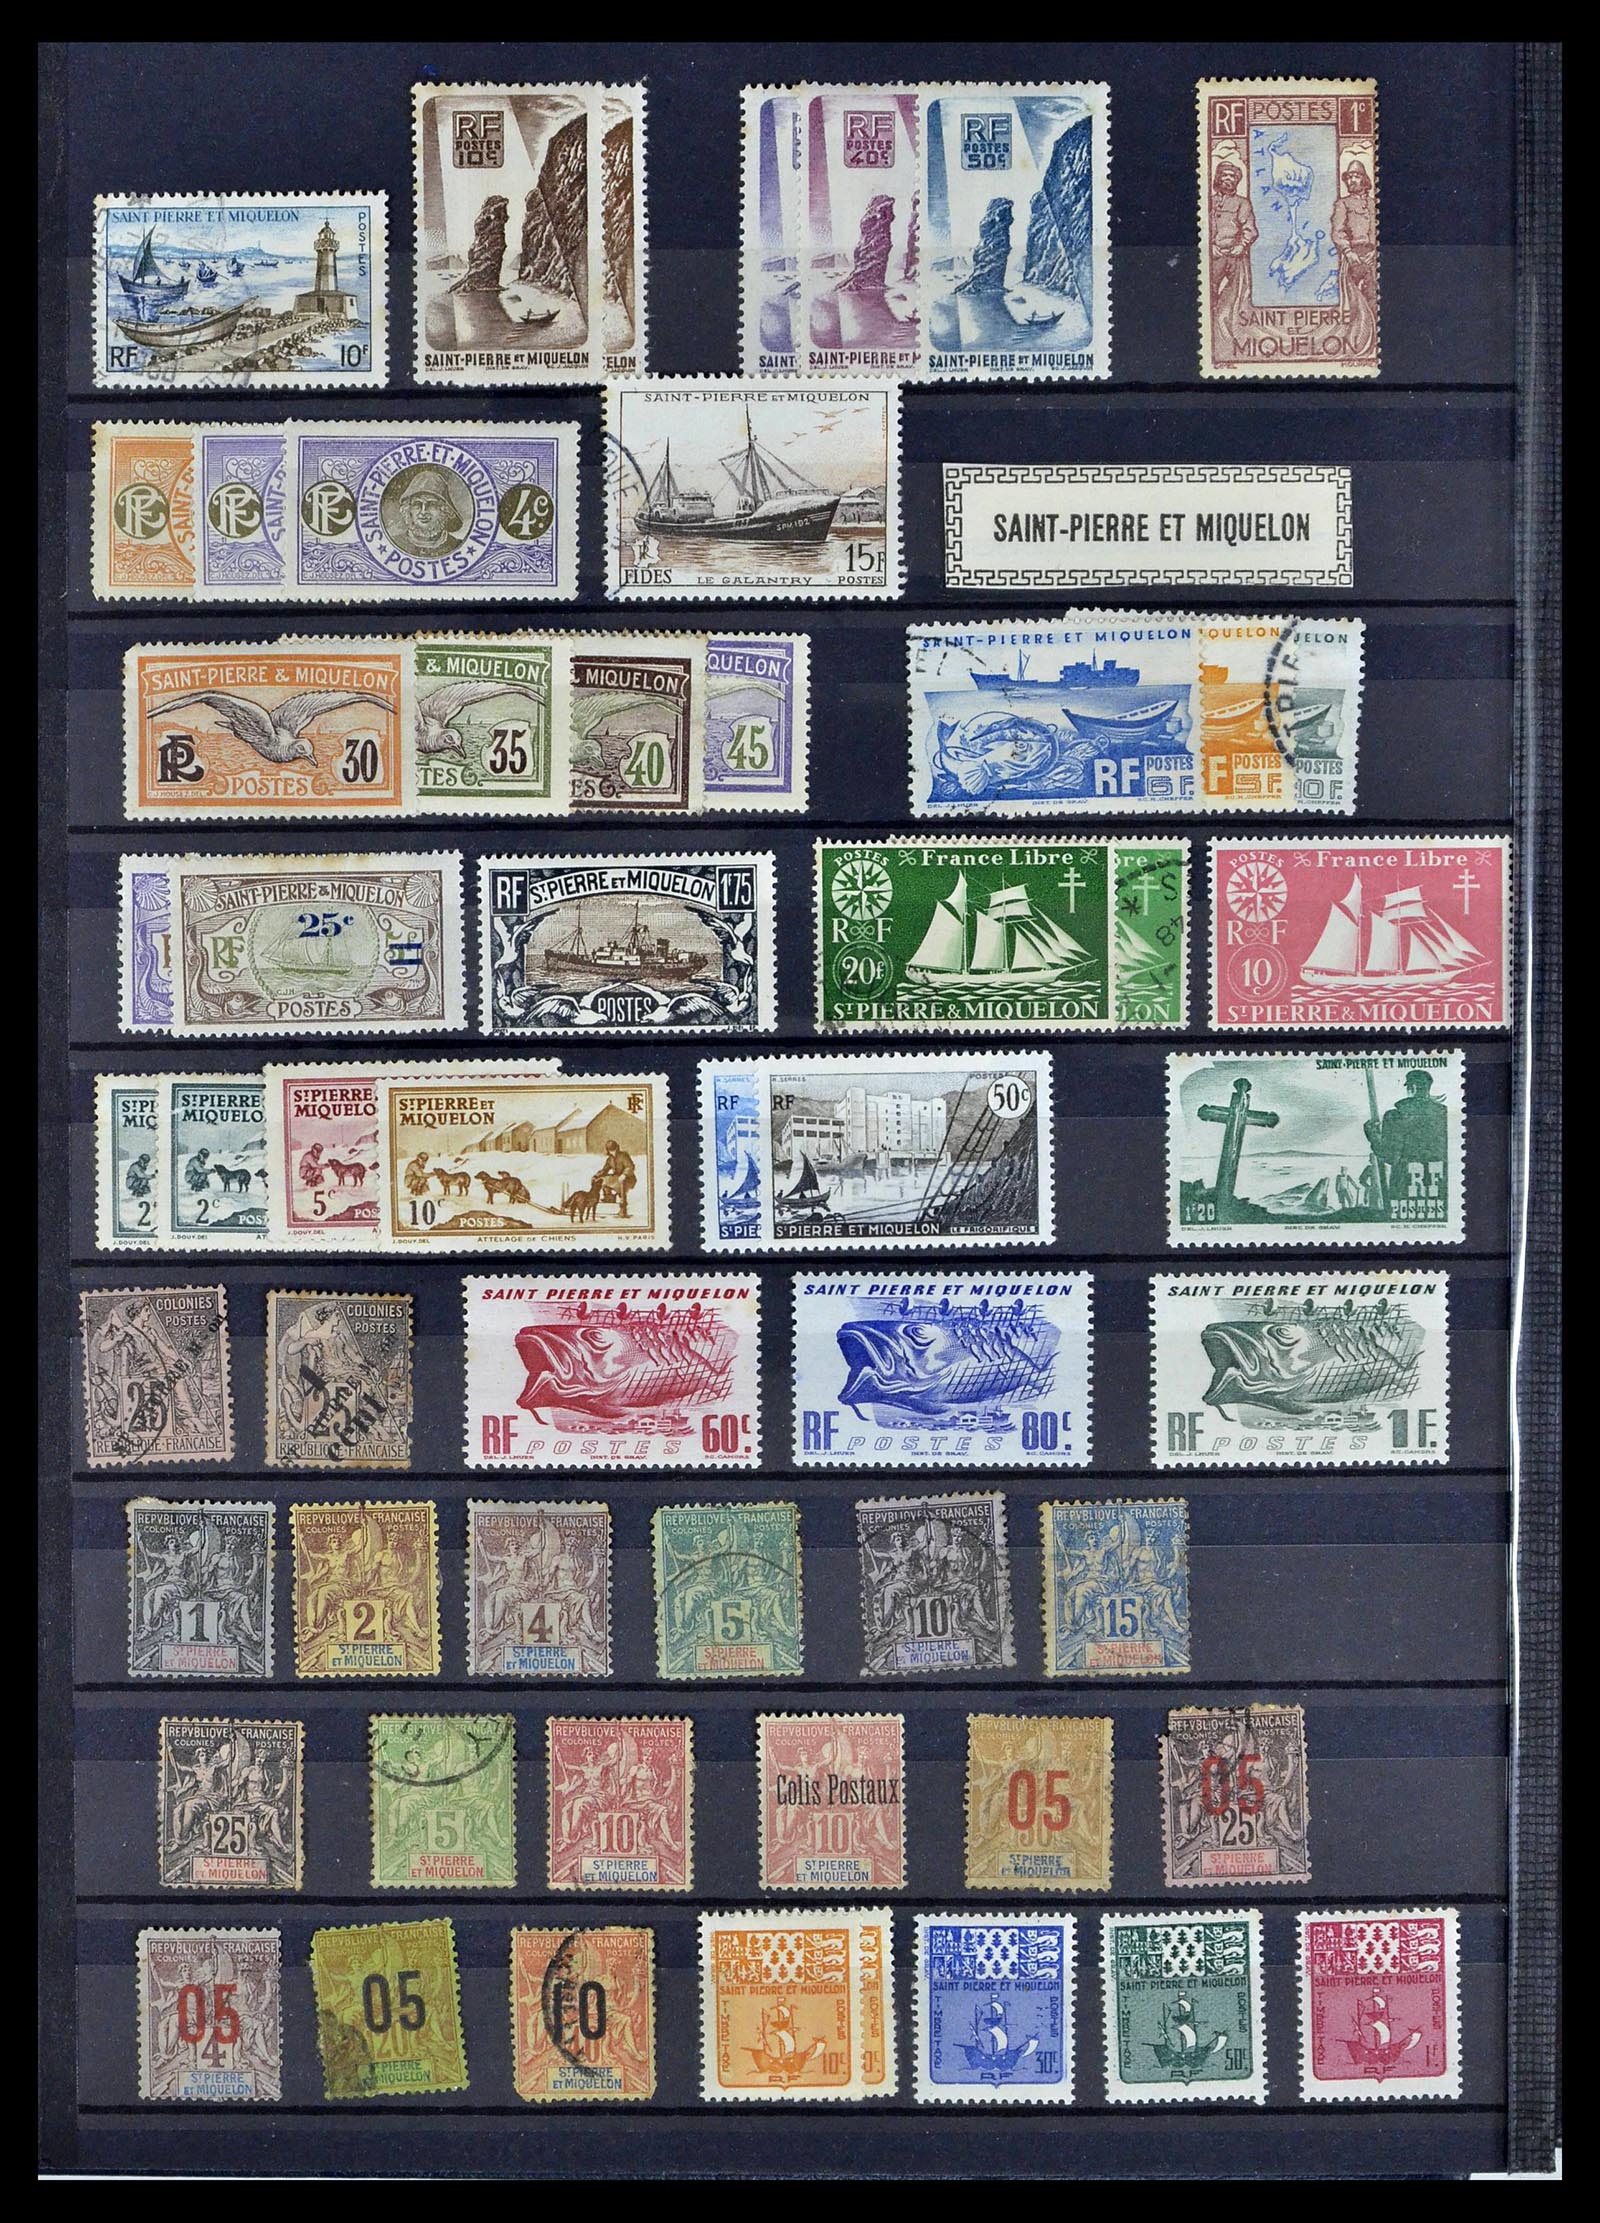 39097 0006 - Stamp collection 39097 French colonies 1880-2000.